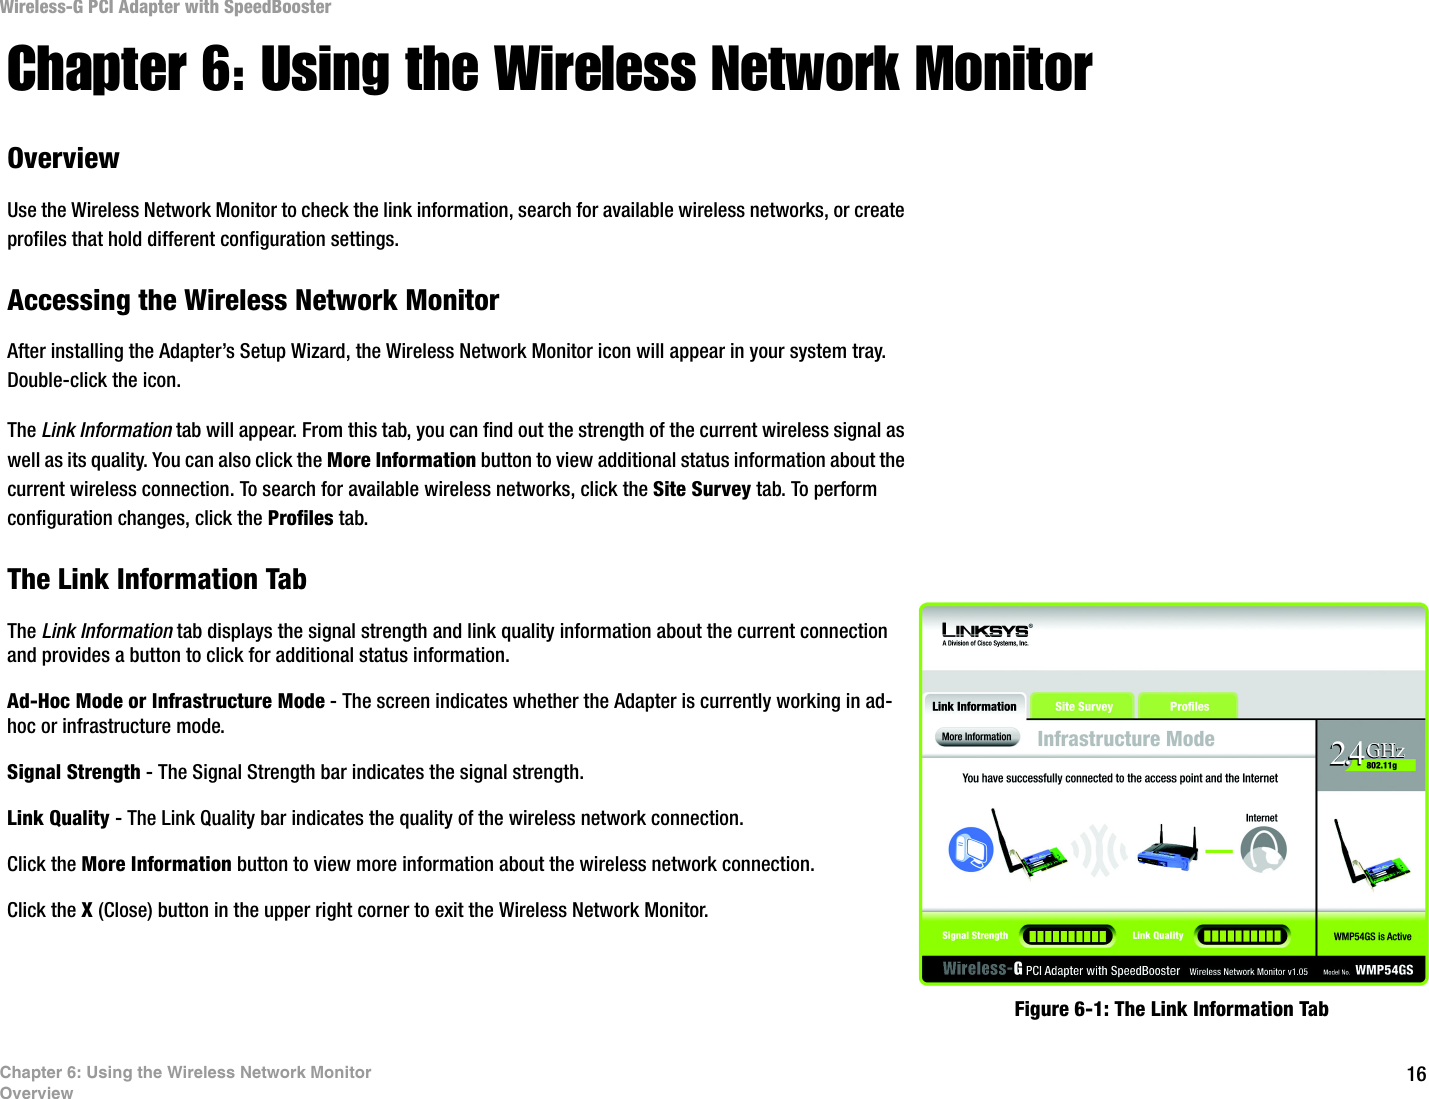 16Chapter 6: Using the Wireless Network MonitorOverviewWireless-G PCI Adapter with SpeedBoosterChapter 6: Using the Wireless Network MonitorOverviewUse the Wireless Network Monitor to check the link information, search for available wireless networks, or create profiles that hold different configuration settings.Accessing the Wireless Network MonitorAfter installing the Adapter’s Setup Wizard, the Wireless Network Monitor icon will appear in your system tray.  Double-click the icon.The Link Information tab will appear. From this tab, you can find out the strength of the current wireless signal as well as its quality. You can also click the More Information button to view additional status information about the current wireless connection. To search for available wireless networks, click the Site Survey tab. To perform configuration changes, click the Profiles tab.The Link Information TabThe Link Information tab displays the signal strength and link quality information about the current connection and provides a button to click for additional status information.  Ad-Hoc Mode or Infrastructure Mode - The screen indicates whether the Adapter is currently working in ad-hoc or infrastructure mode. Signal Strength - The Signal Strength bar indicates the signal strength. Link Quality - The Link Quality bar indicates the quality of the wireless network connection.Click the More Information button to view more information about the wireless network connection.Click the X (Close) button in the upper right corner to exit the Wireless Network Monitor. Figure 6-1: The Link Information Tab